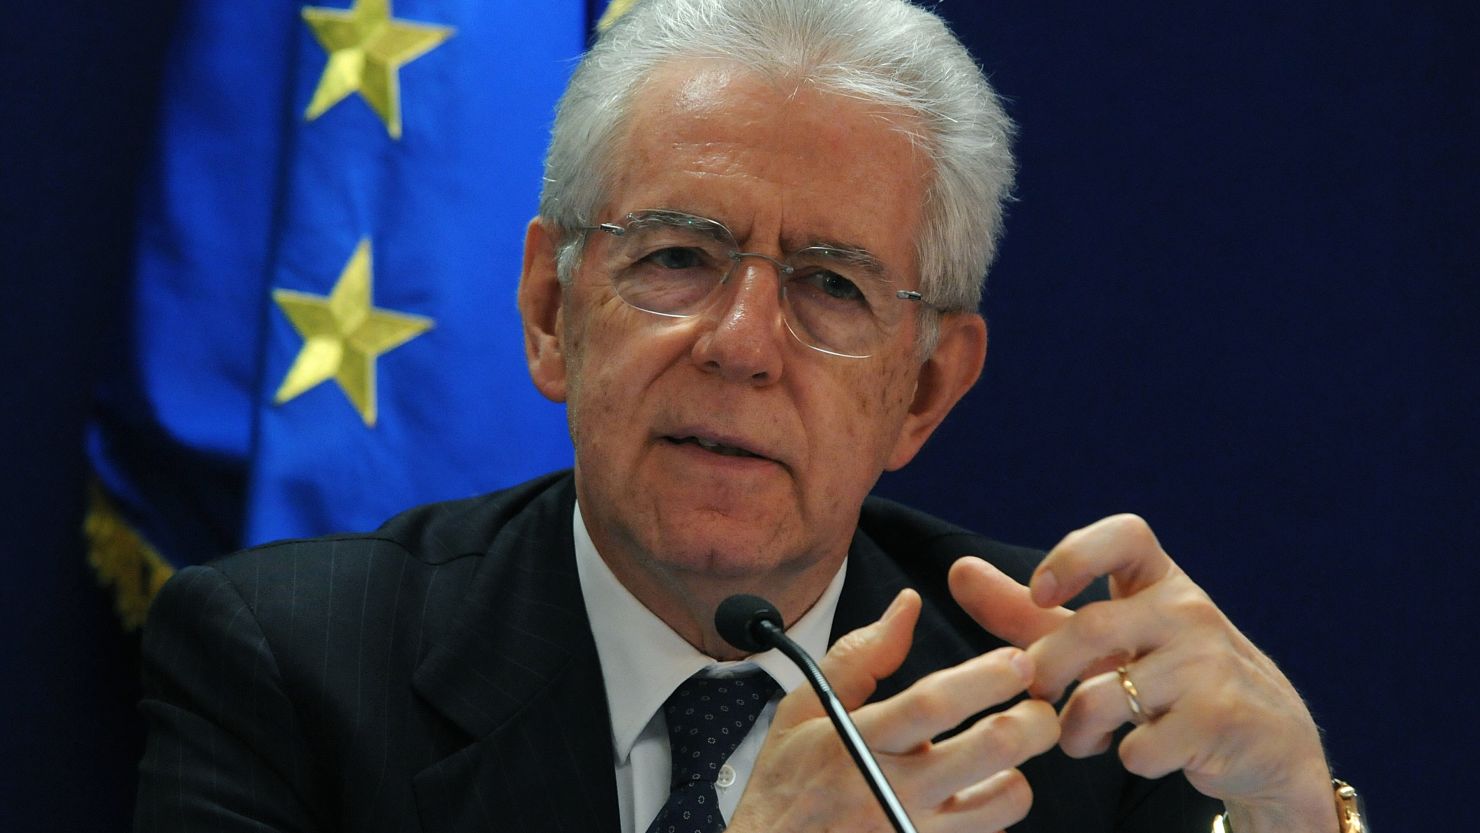 Italy's Prime Minister Mario Monti, shown in this file photo, resigned after Parliament approved the budget.